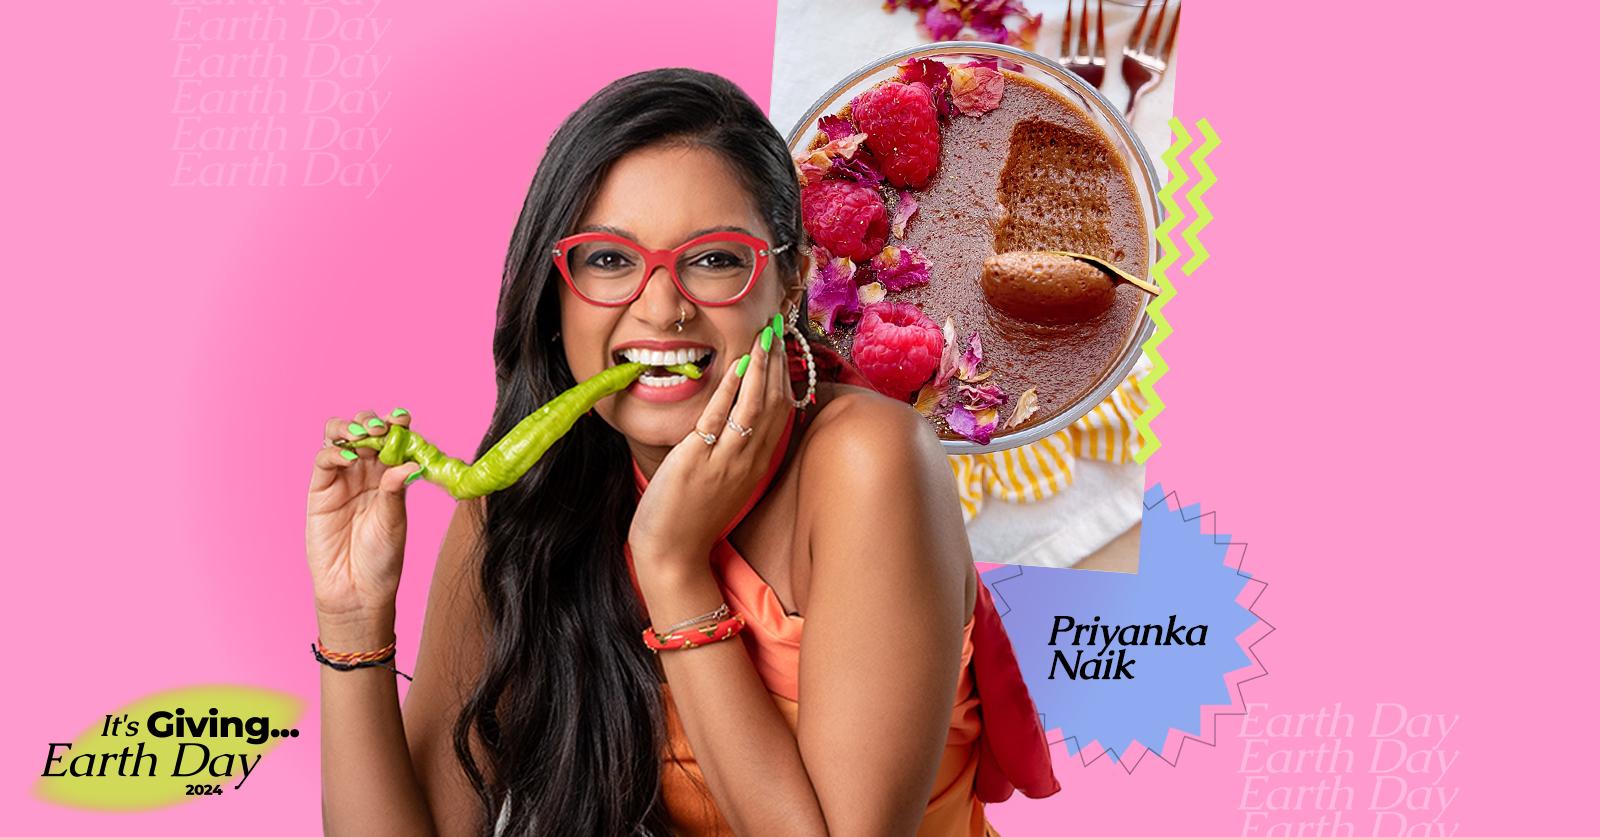 On a pink background, Chef Priyanka Naik bites down on a green pepper, alongside an aerial photo of a chocolate mousse.